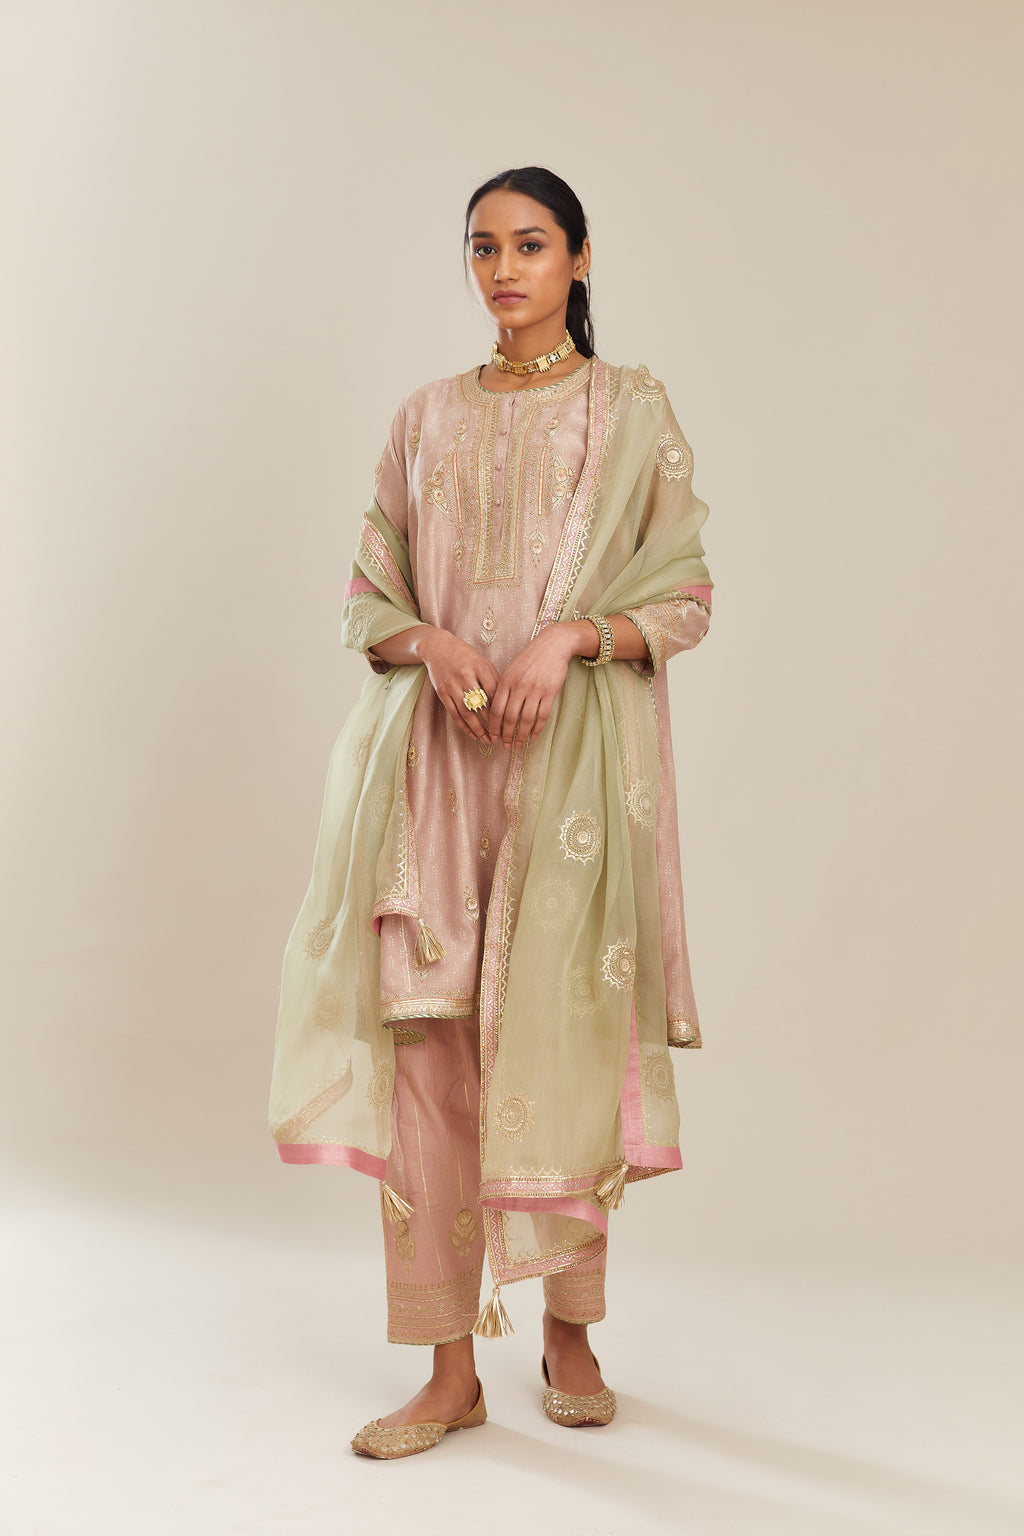 Sage green silk organza dupatta with delicate gold gota embroidery and contrast colored border running along all edges.